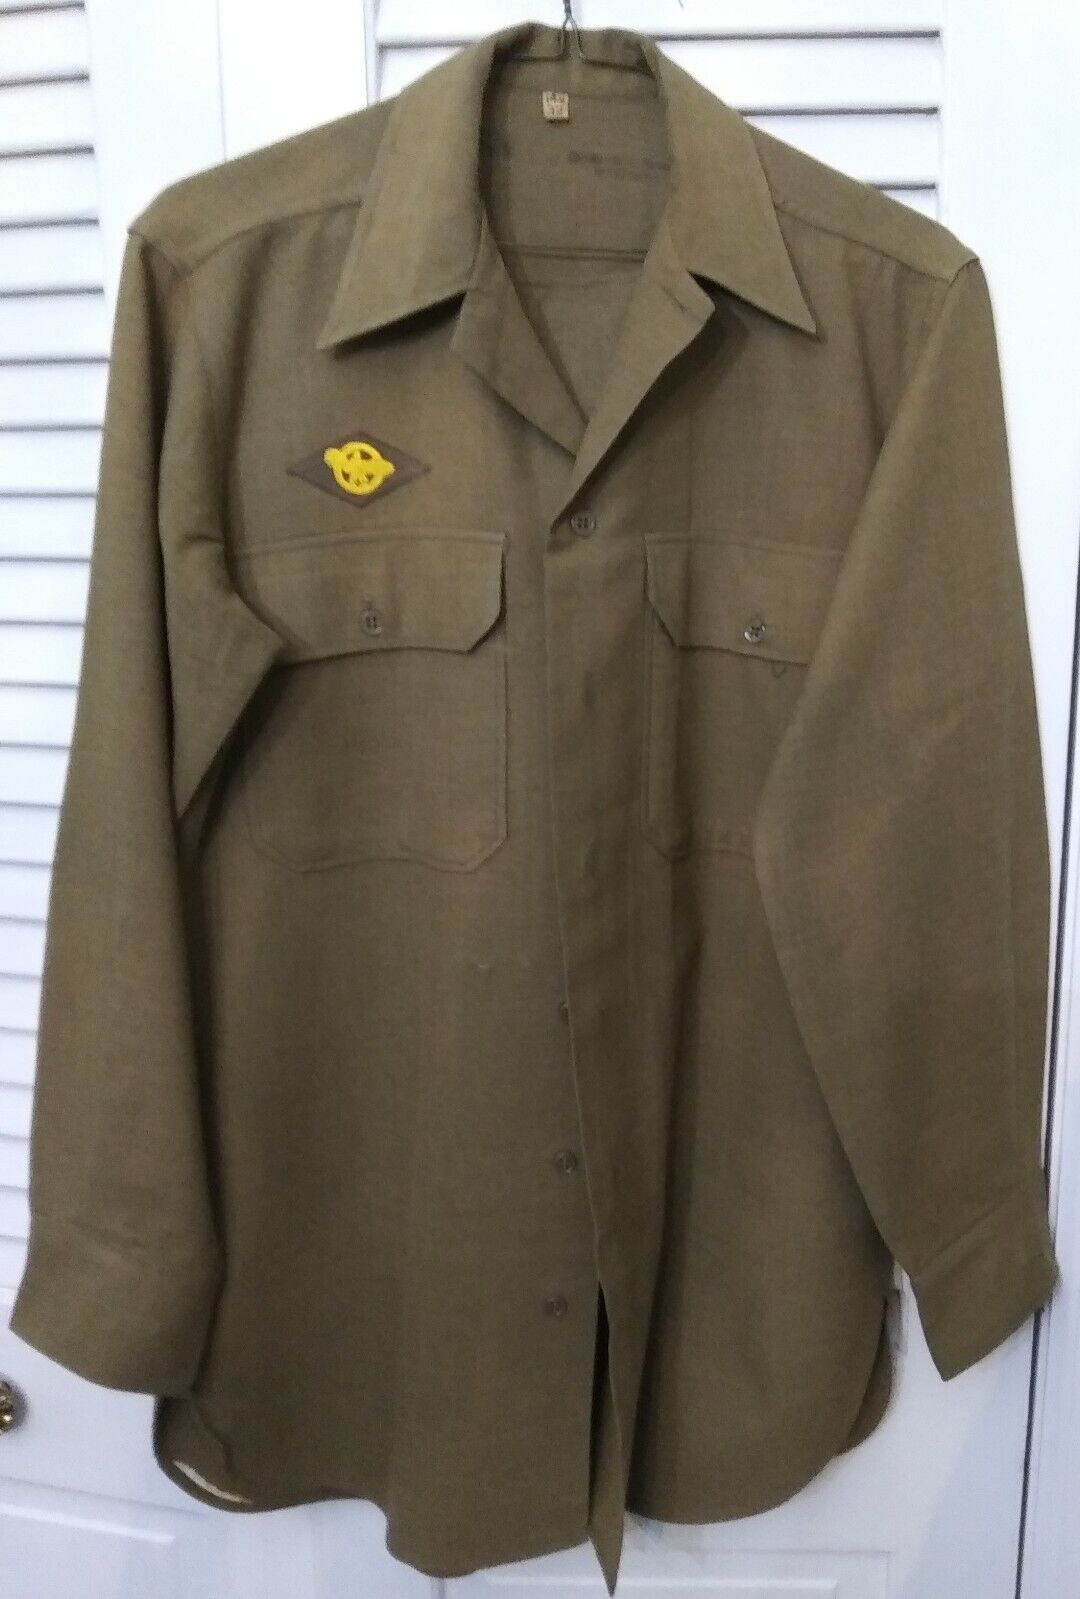 Authentic World War II Army Wool Shirt with Under Placket Flap